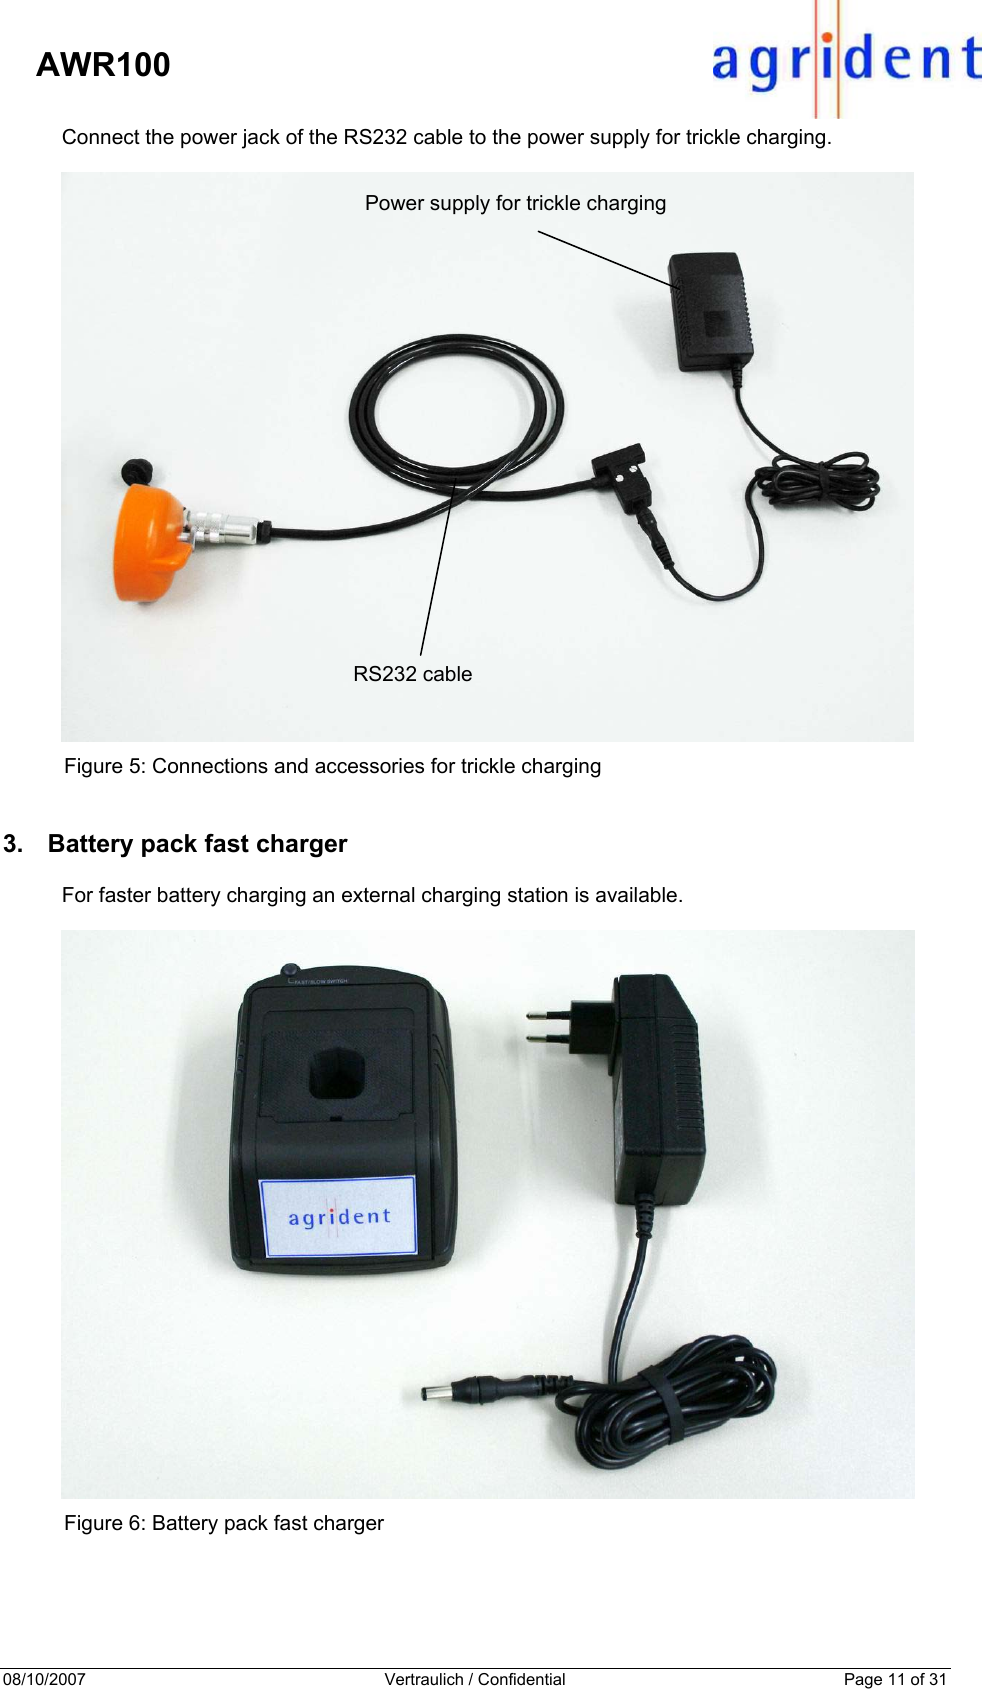 08/10/2007  Vertraulich / Confidential  Page 11 of 31     AWR100 Connect the power jack of the RS232 cable to the power supply for trickle charging.    Figure 5: Connections and accessories for trickle charging 3.  Battery pack fast charger For faster battery charging an external charging station is available.   Figure 6: Battery pack fast charger  Power supply for trickle charging RS232 cable 